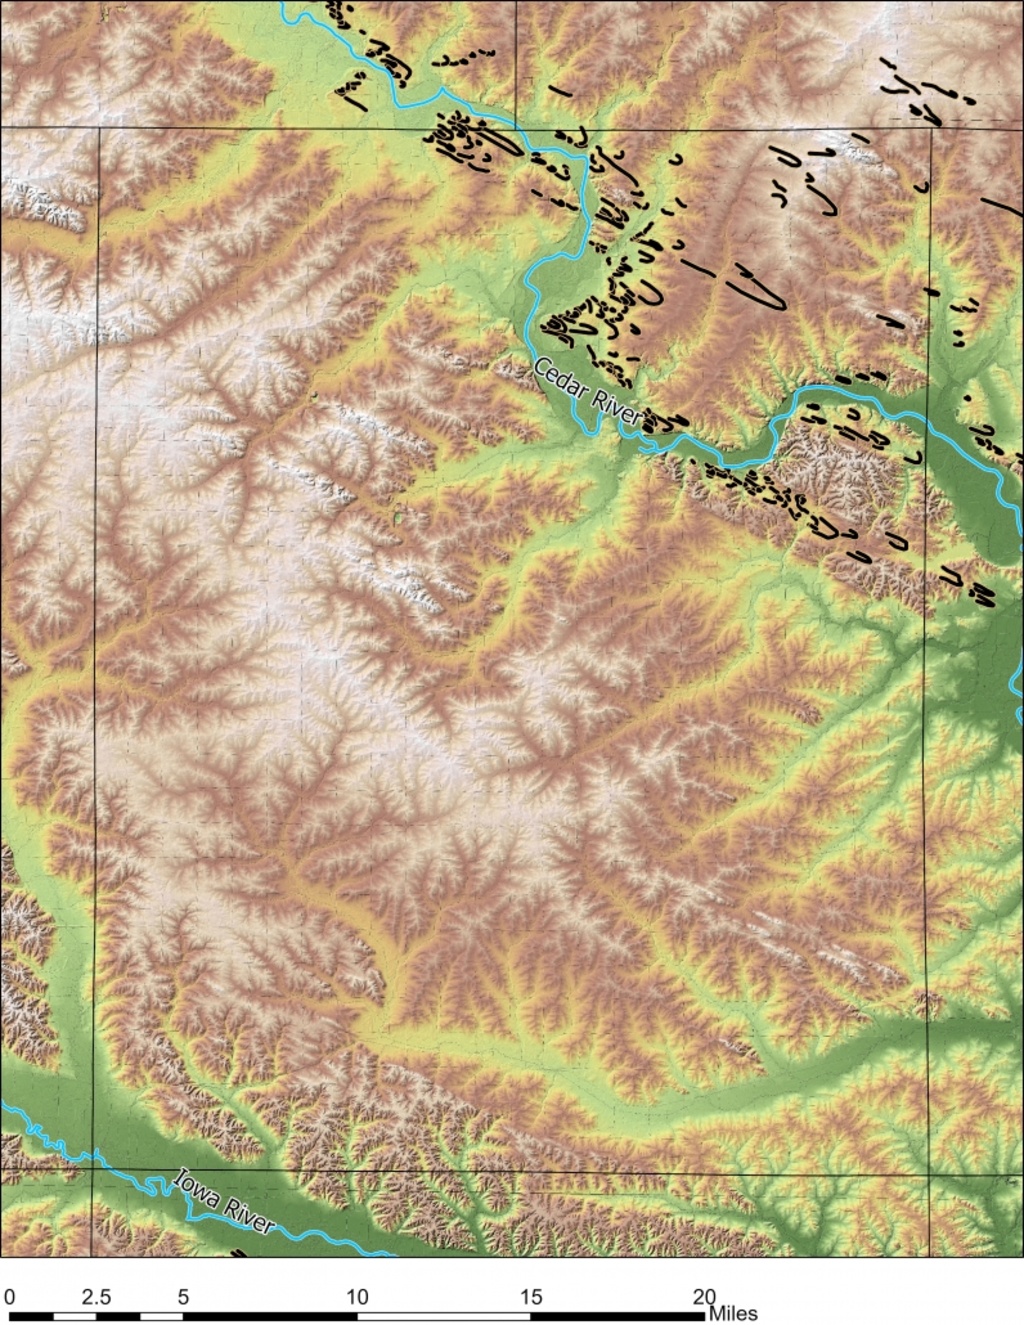 Benton County shows the contrast between the Cedar and Iowa River valleys. The Cedar has numerous dunes (black lines) coming out of the valley while the Iowa largely lacks these features.